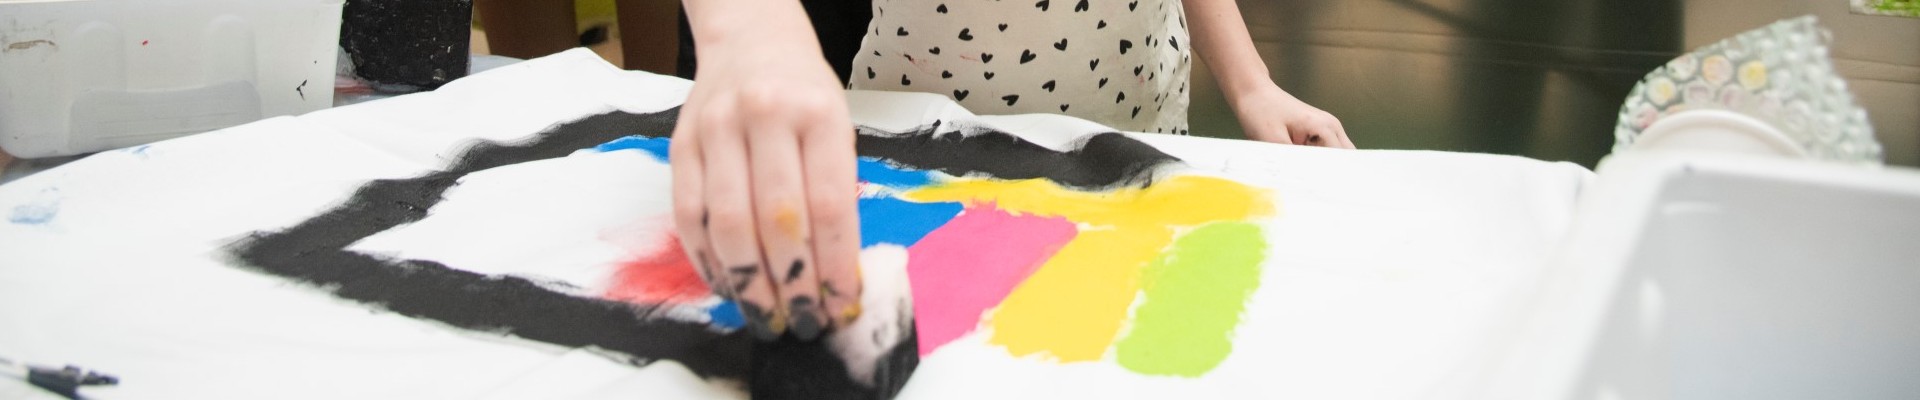 A young person creating a hand stamped tea towel